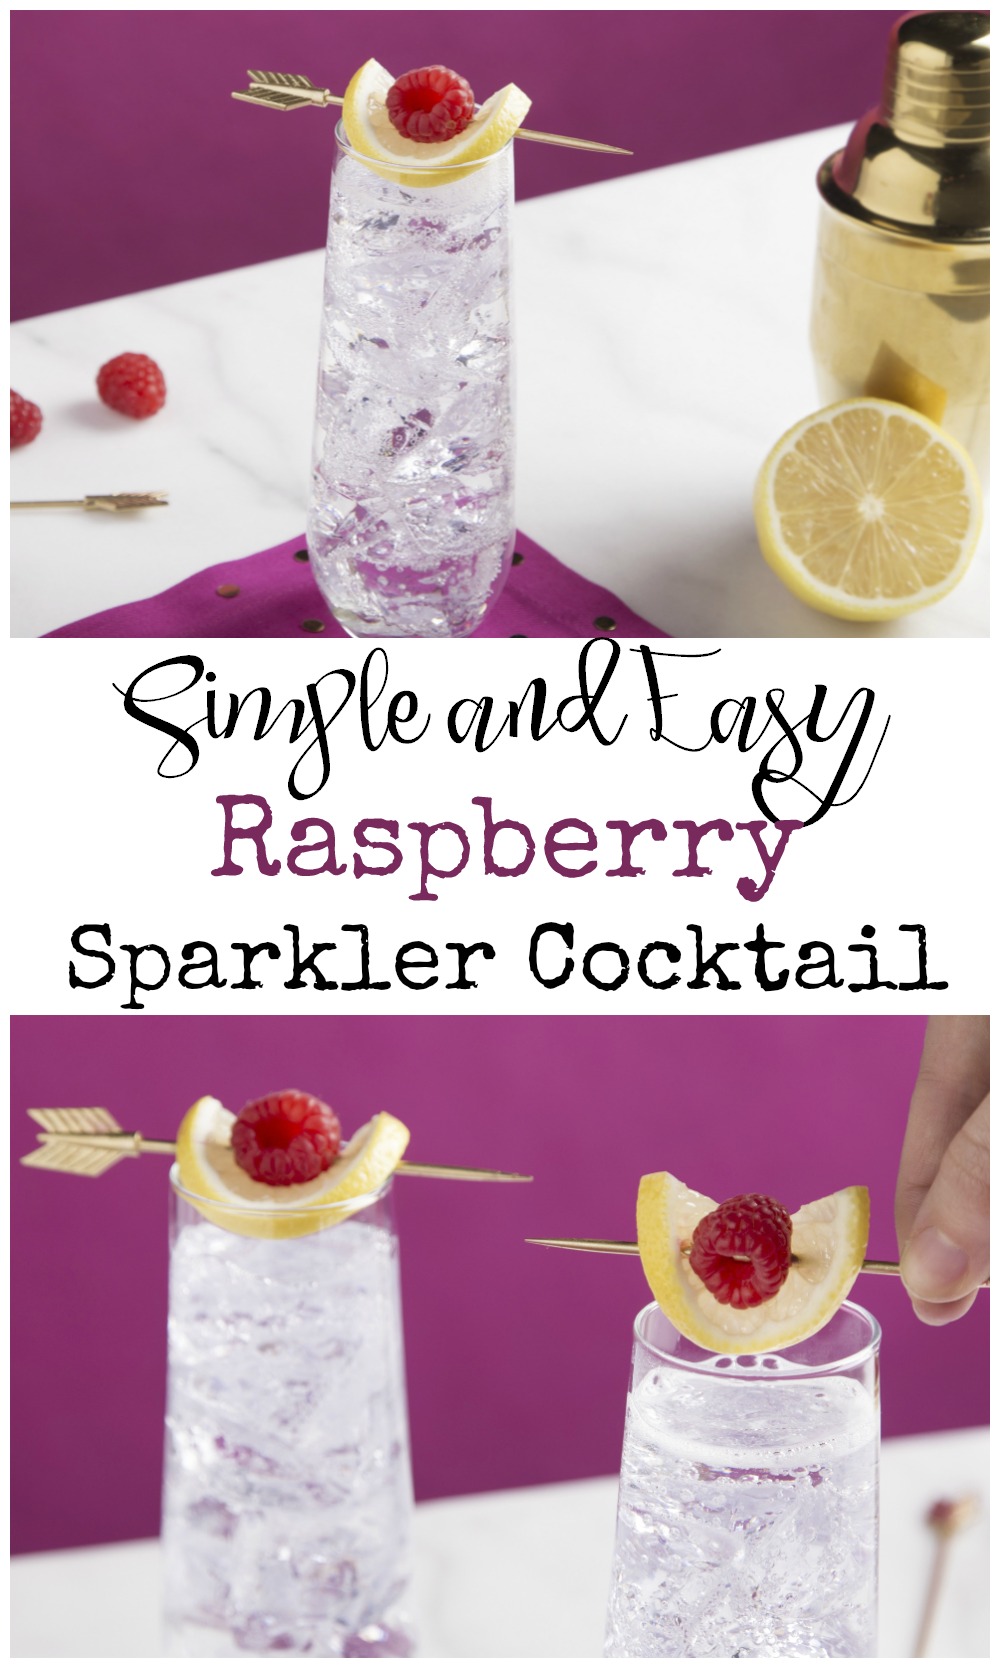 Simple and easy Raspberry Sparkler Cocktail recipe